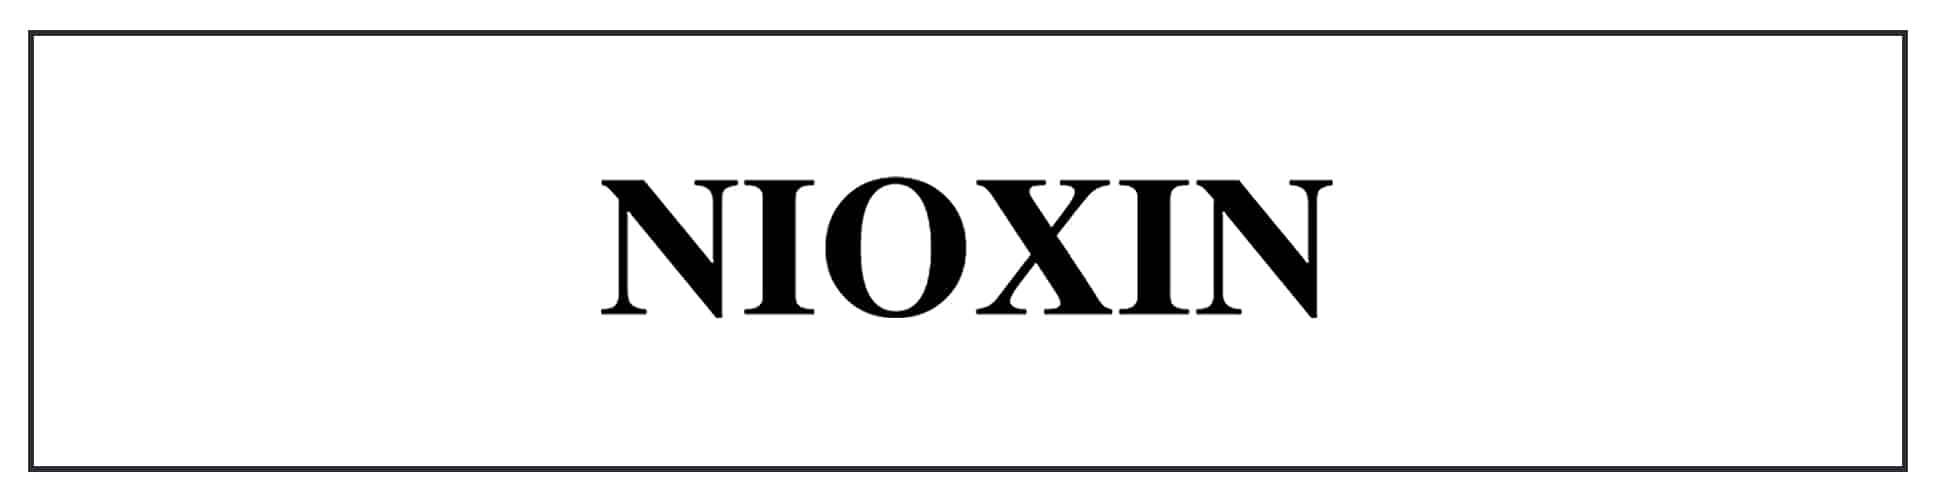 A black and white image of the word nioxin.